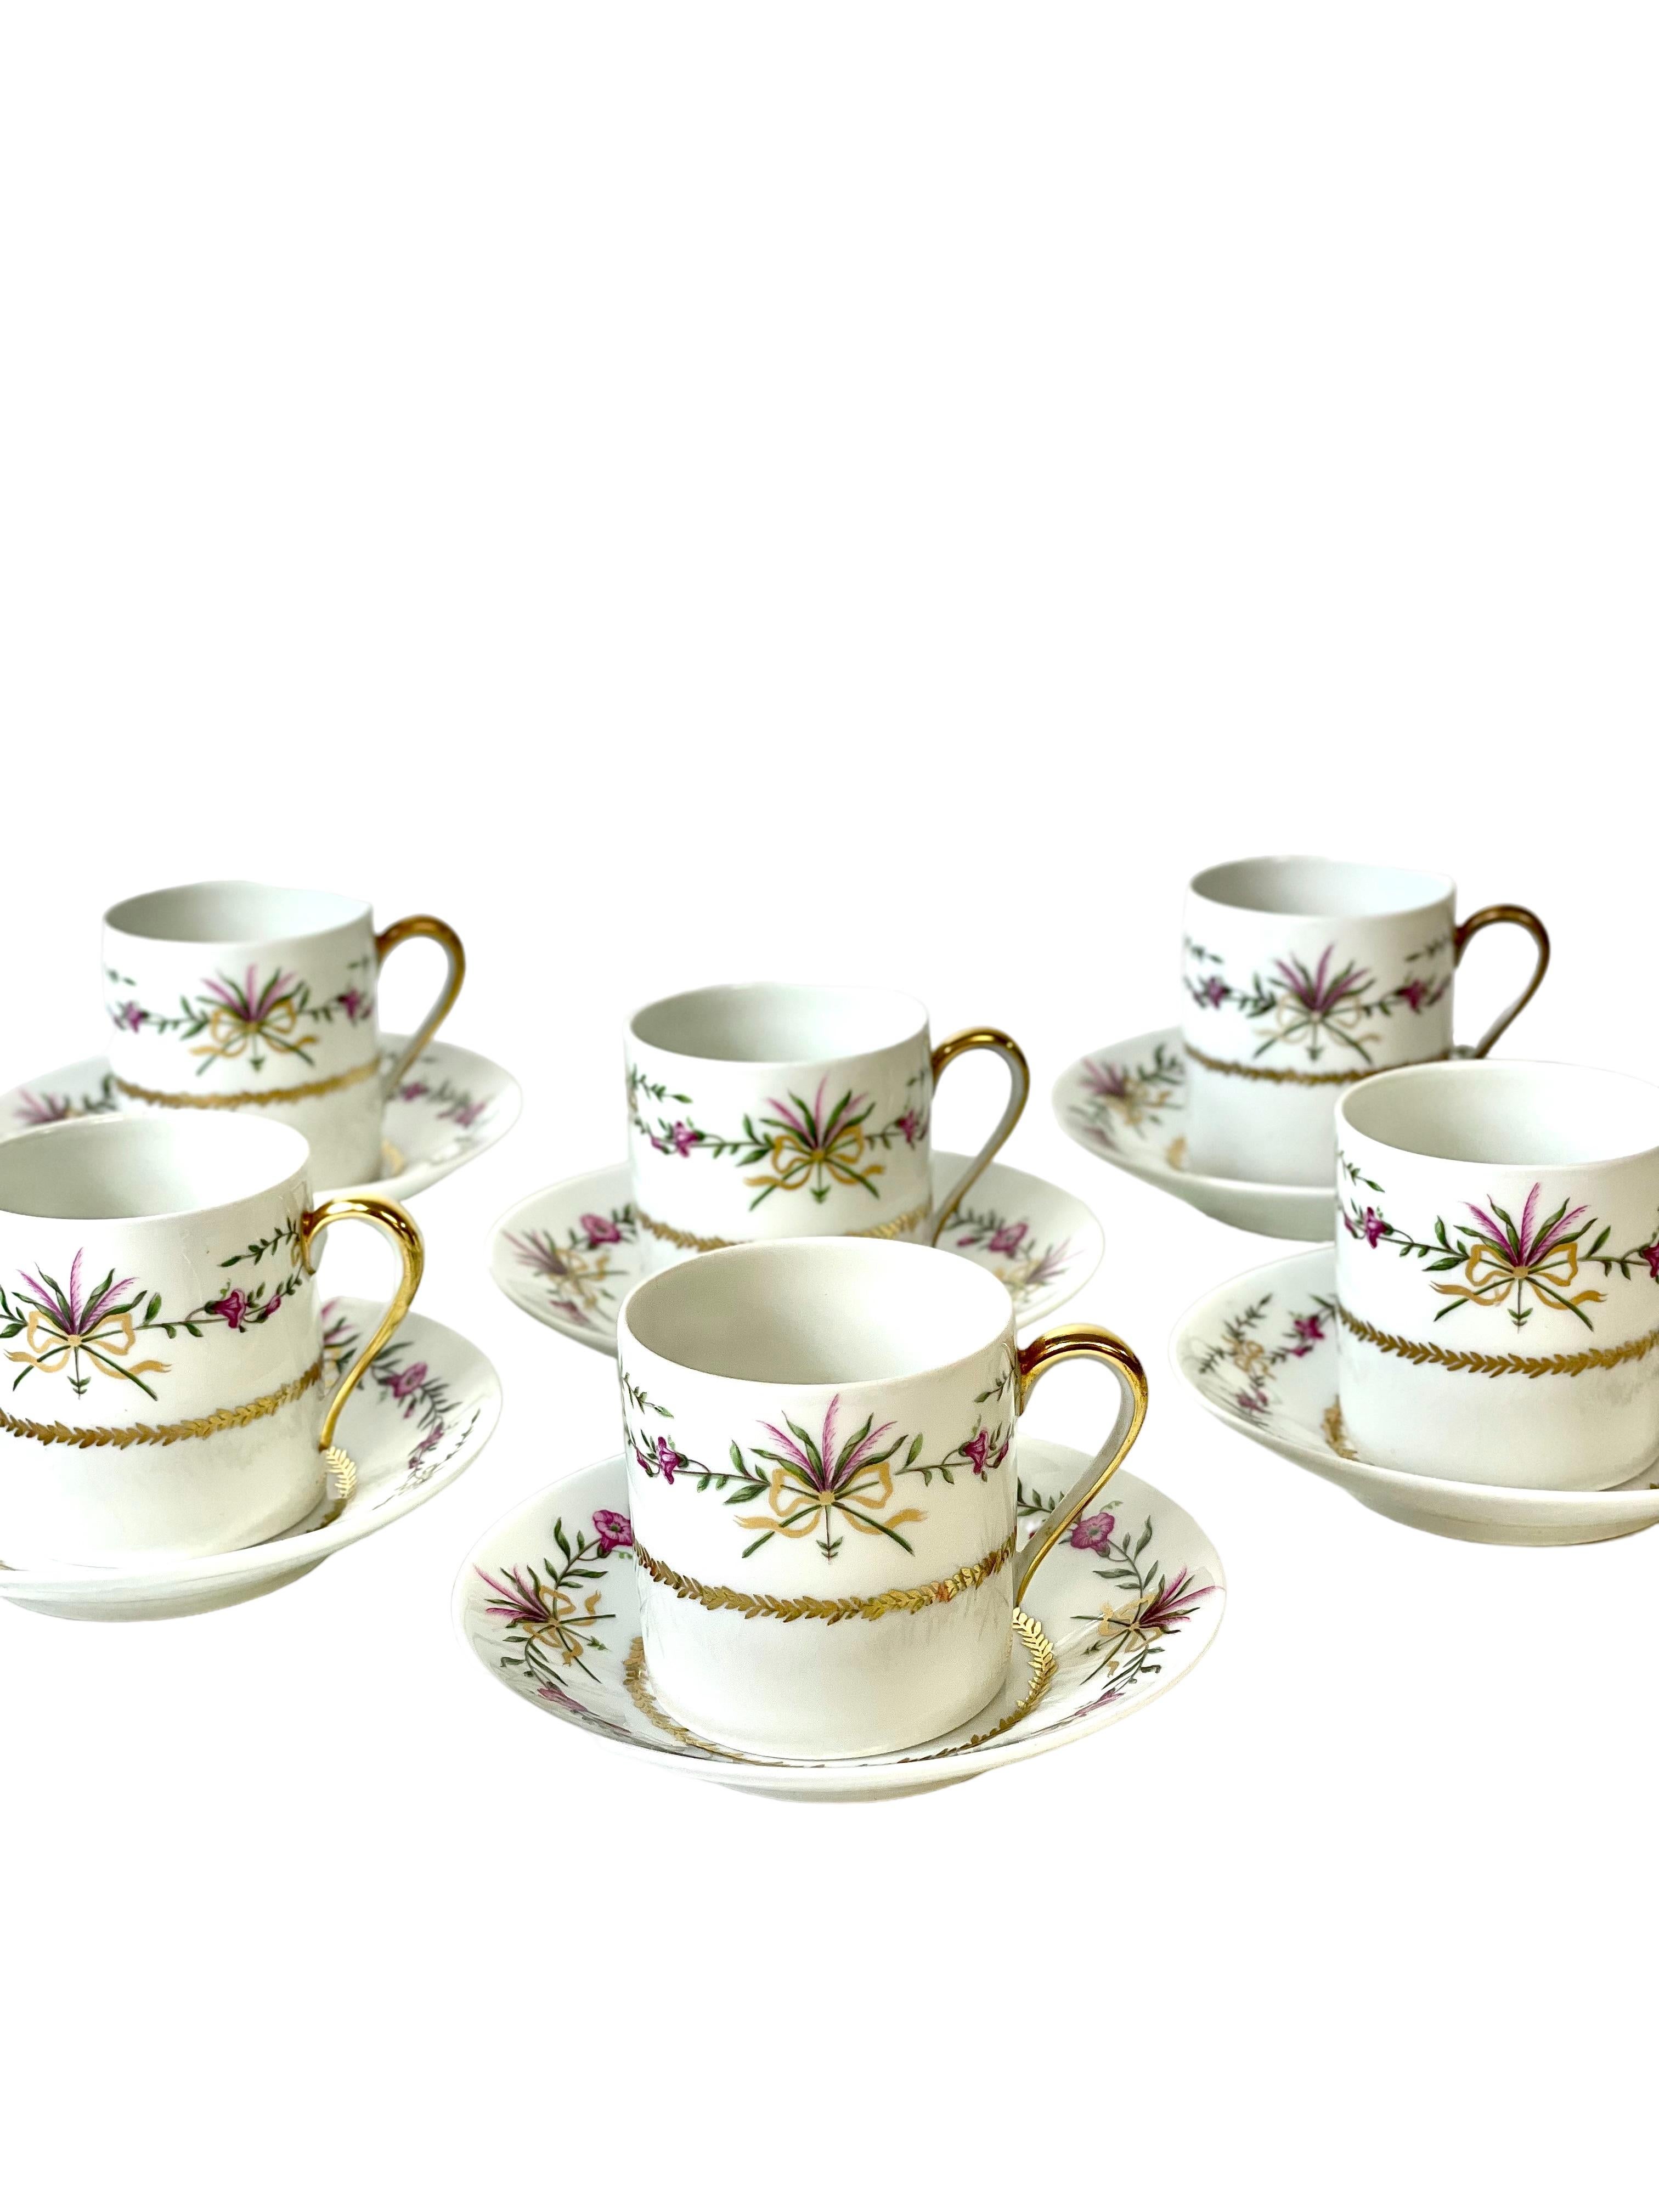 French Dinner Service of 65 Pieces in Limoges Porcelain, by Raynaud